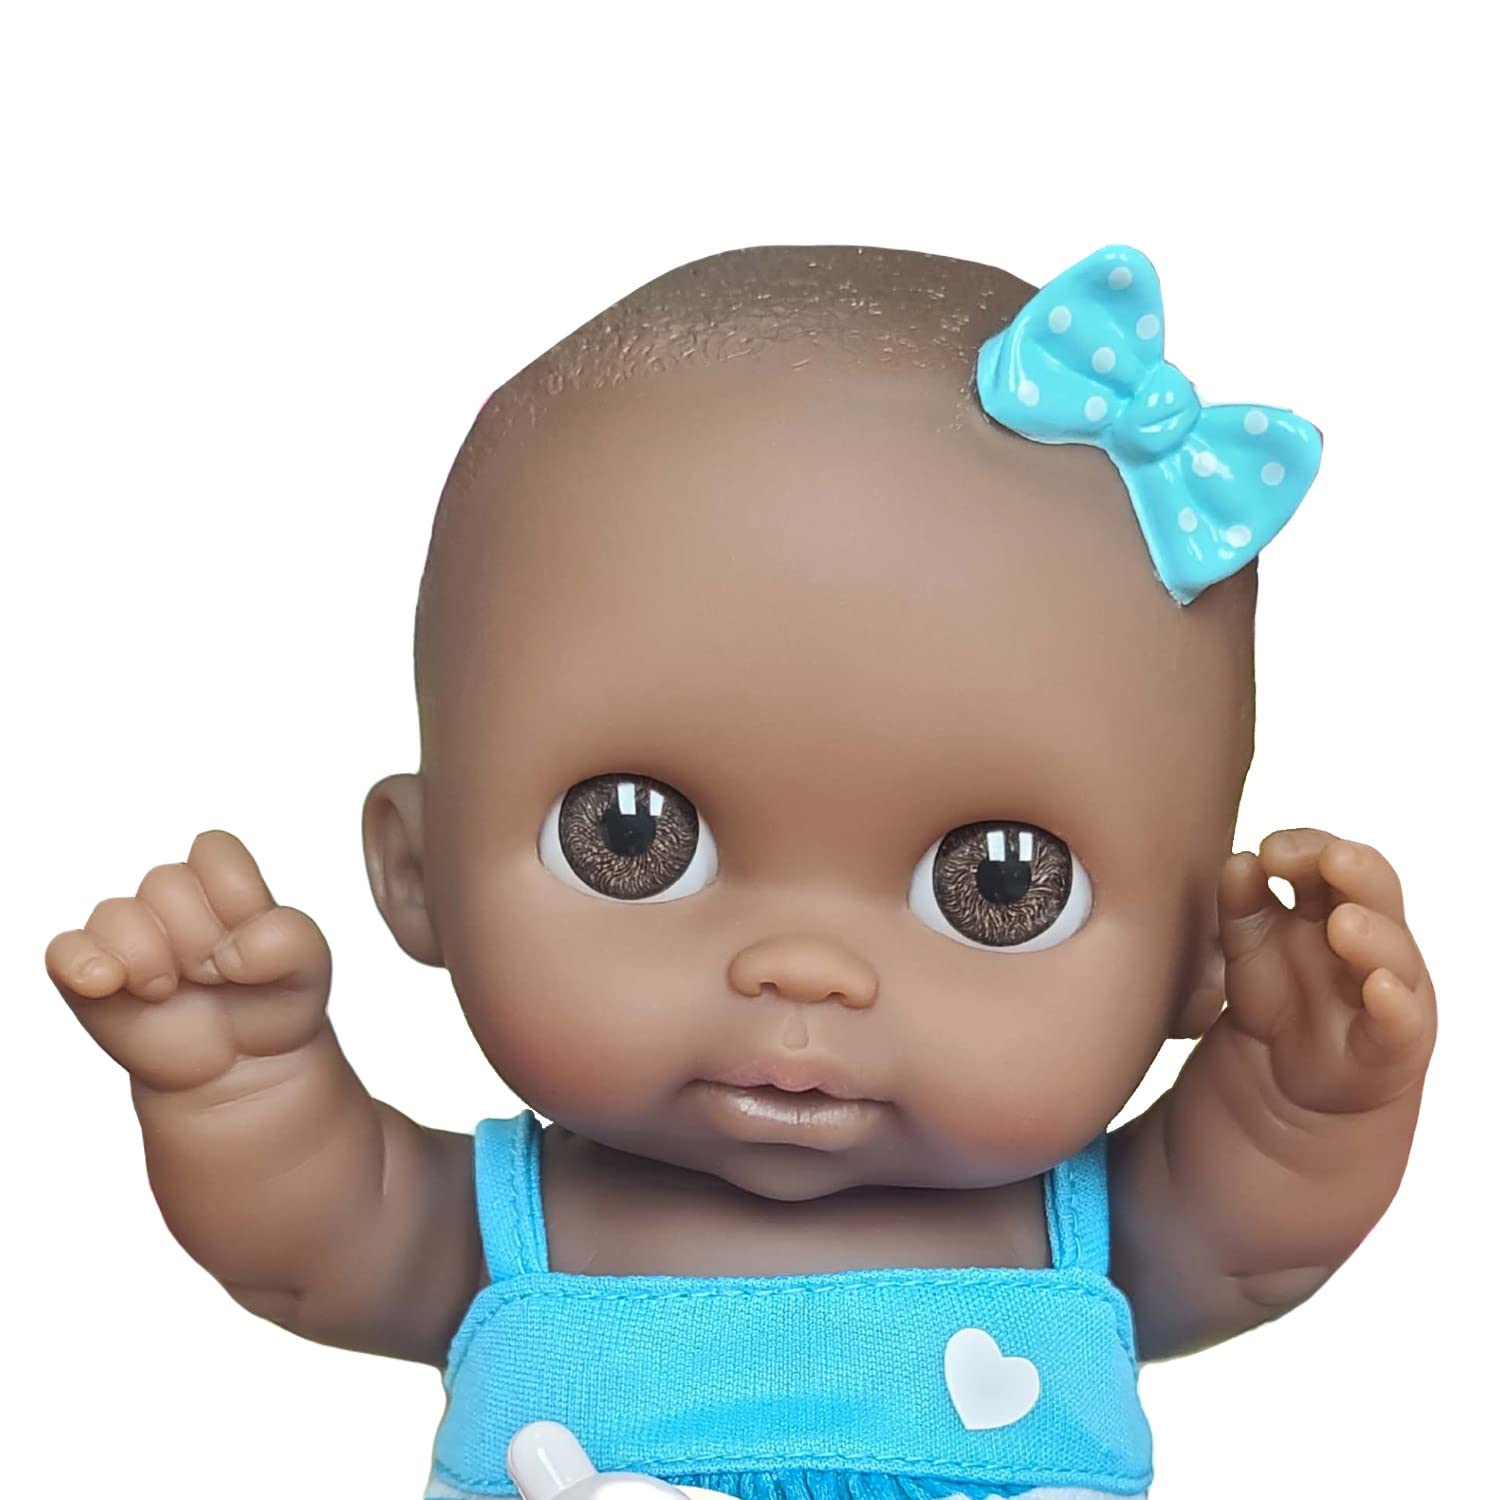 JC Toys Adorable Lil' Cutesies Lila African American All Vinyl Water Friendly Doll, 8.5